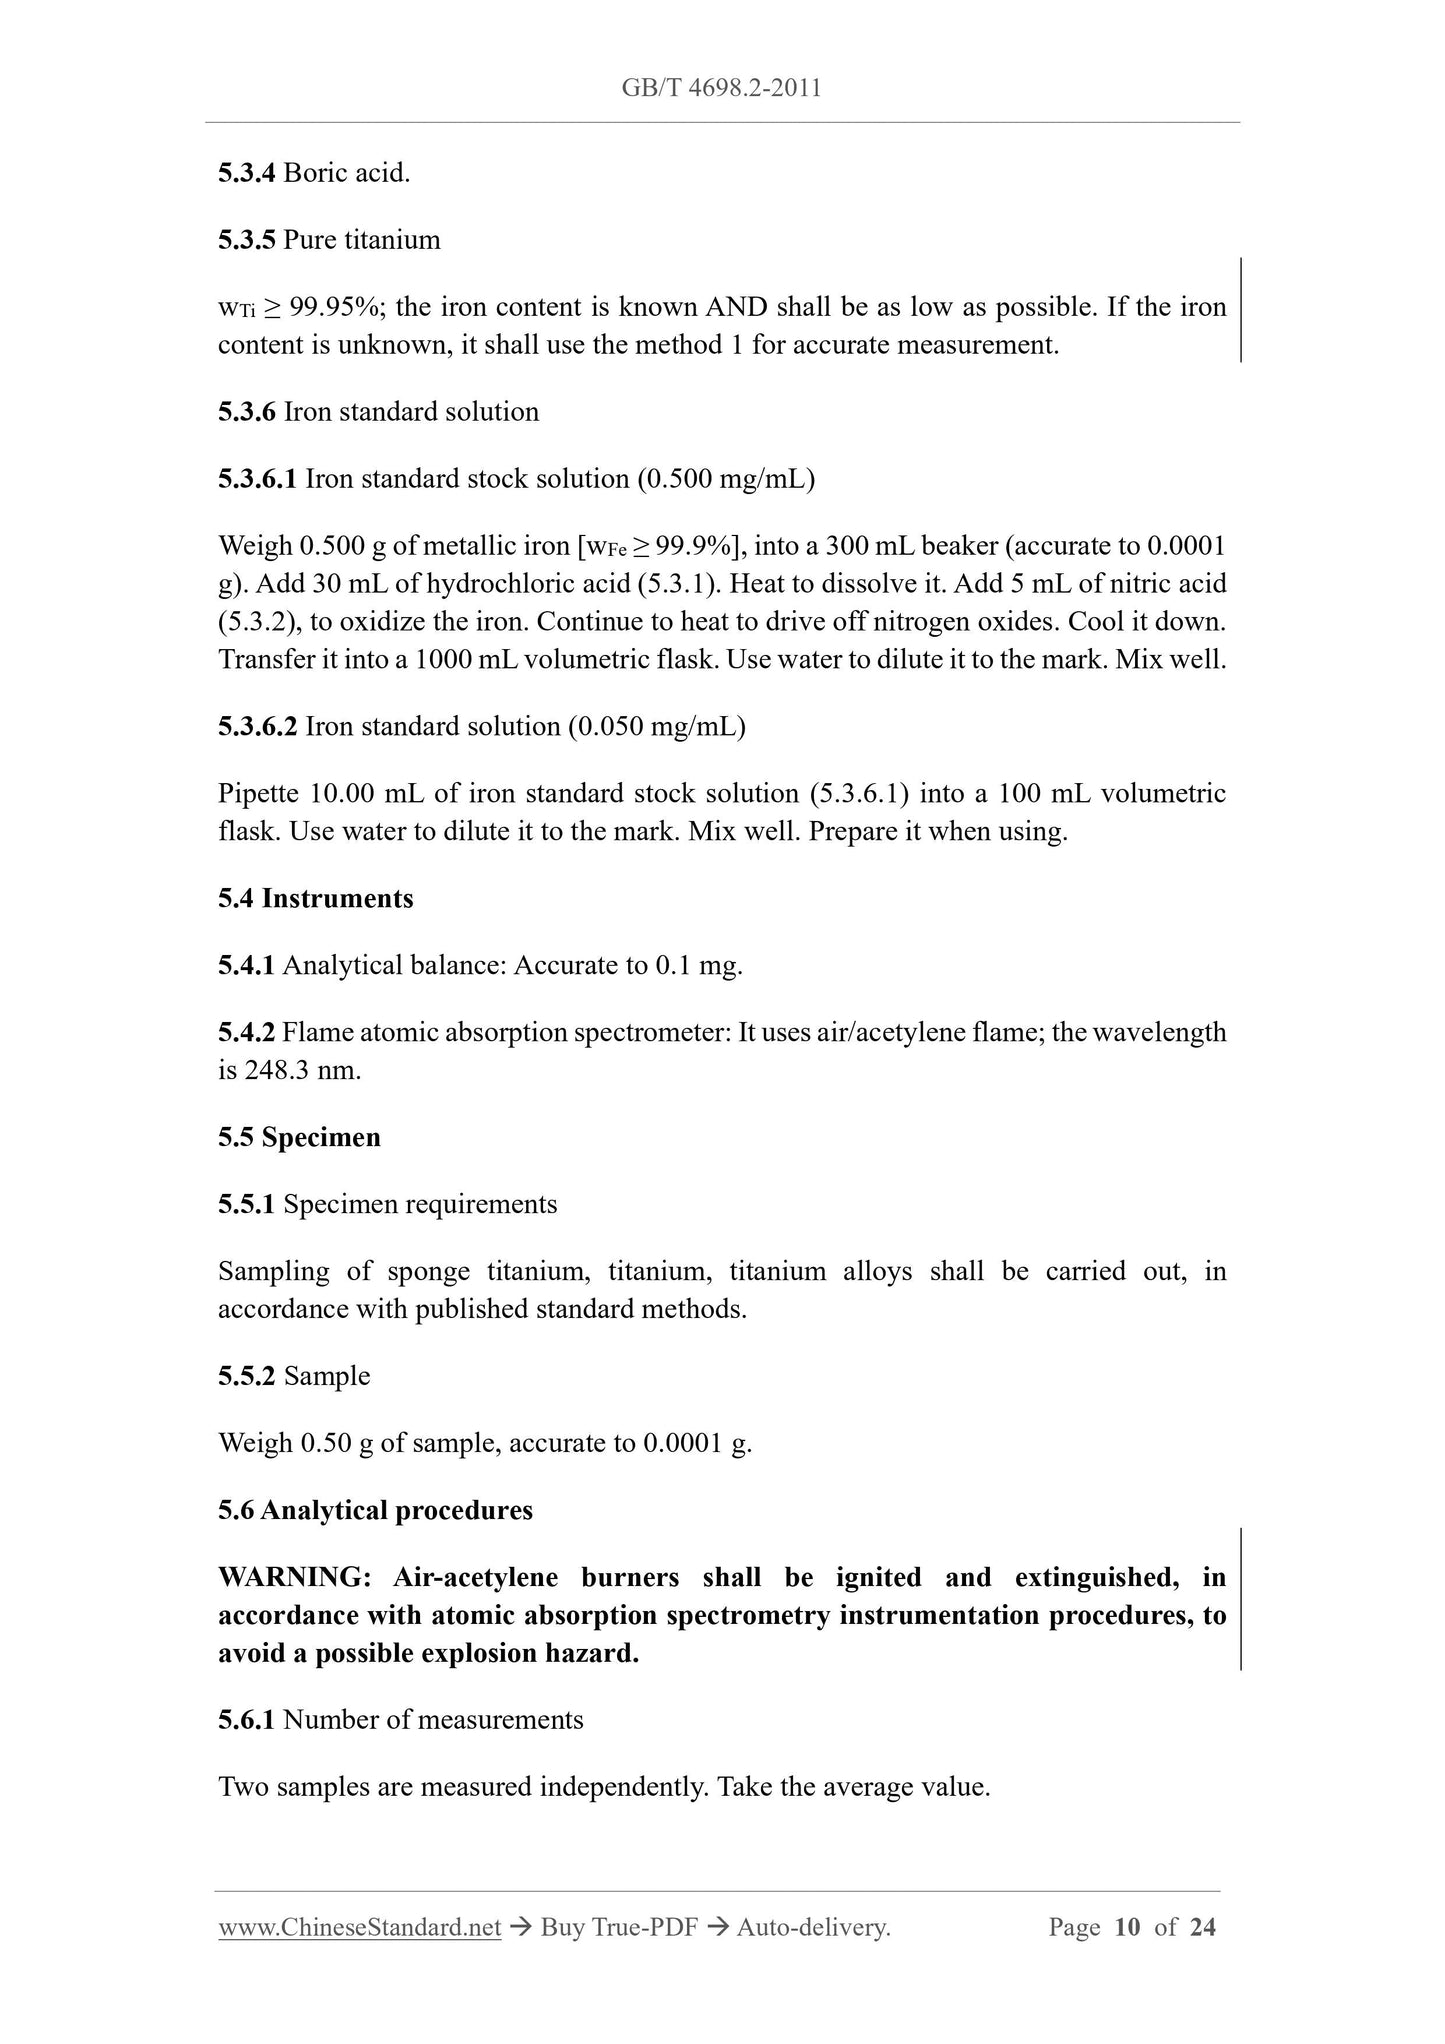 GB/T 4698.2-2011 Page 5